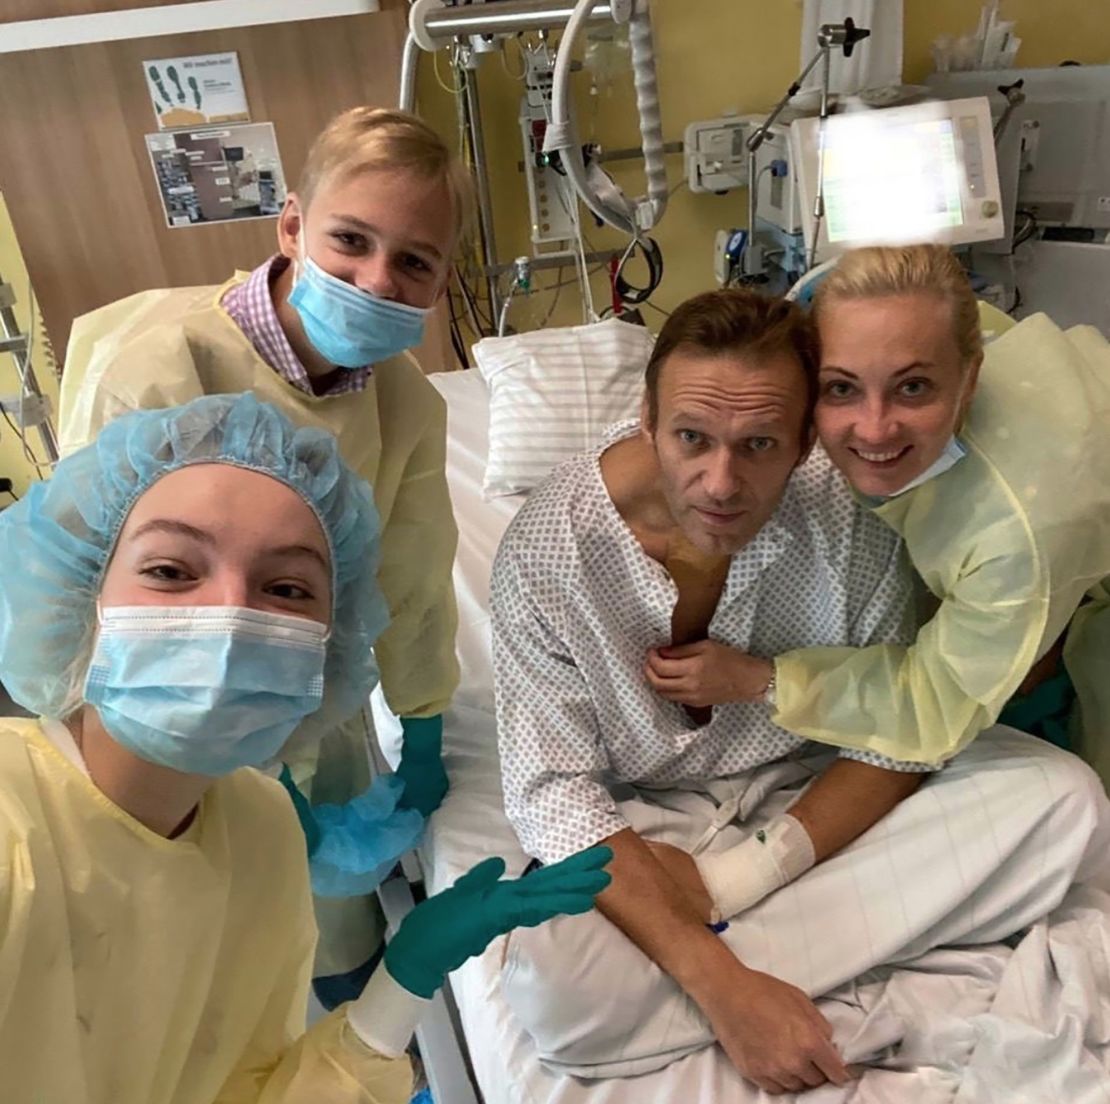 A photo shared on Navalny's instagram account shows the Russian opposition leader in a hospital bed surrounded by his wife and two children as his treatment continues following novichok poisoning in 2020. 